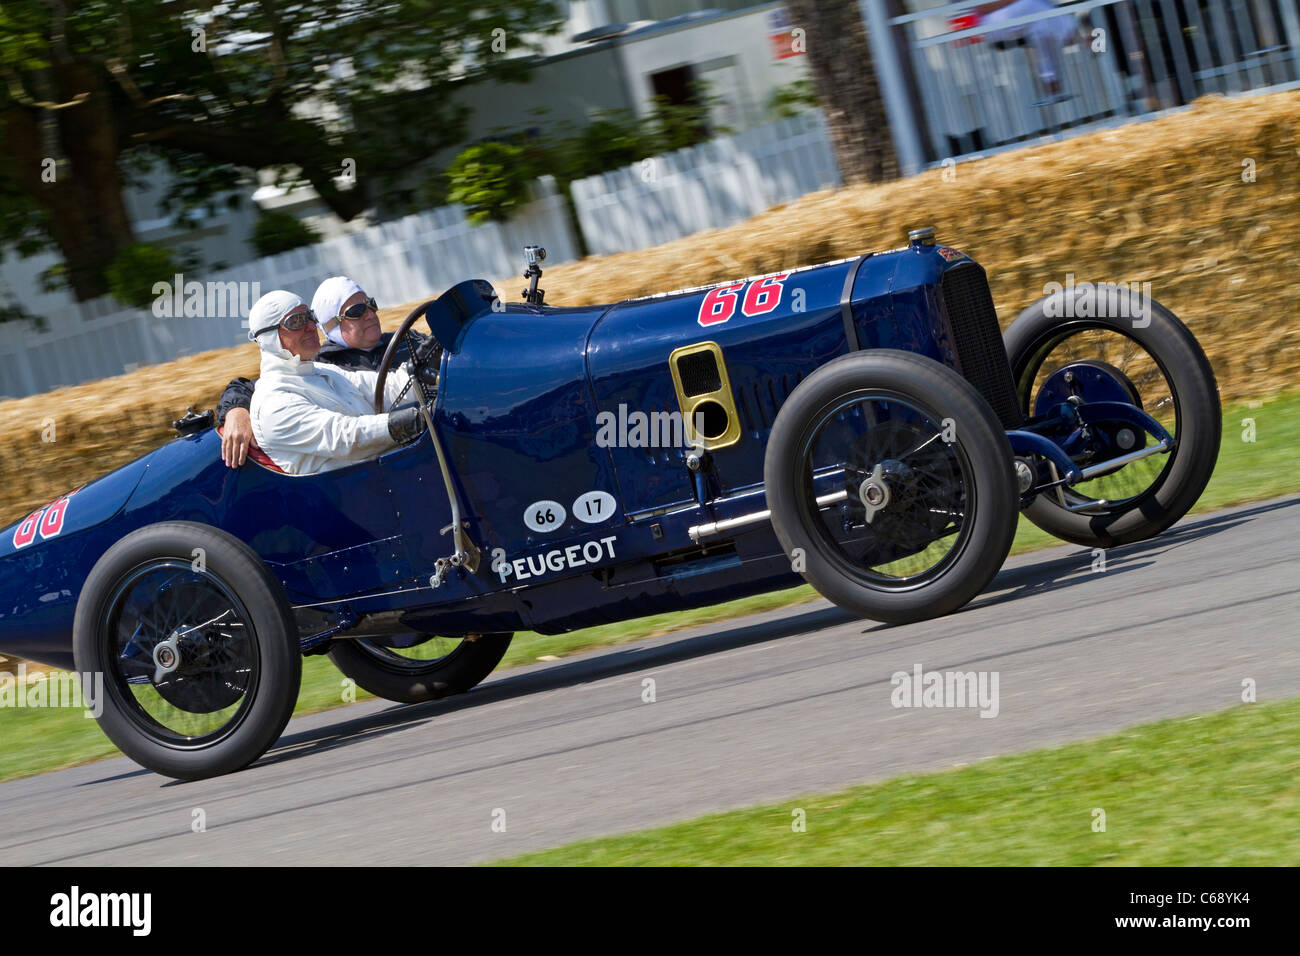 1913 Peugeot L45 with driver Rick Rawlins at the 2011 Goodwood Festival of Speed, Sussex, England, UK. Stock Photo